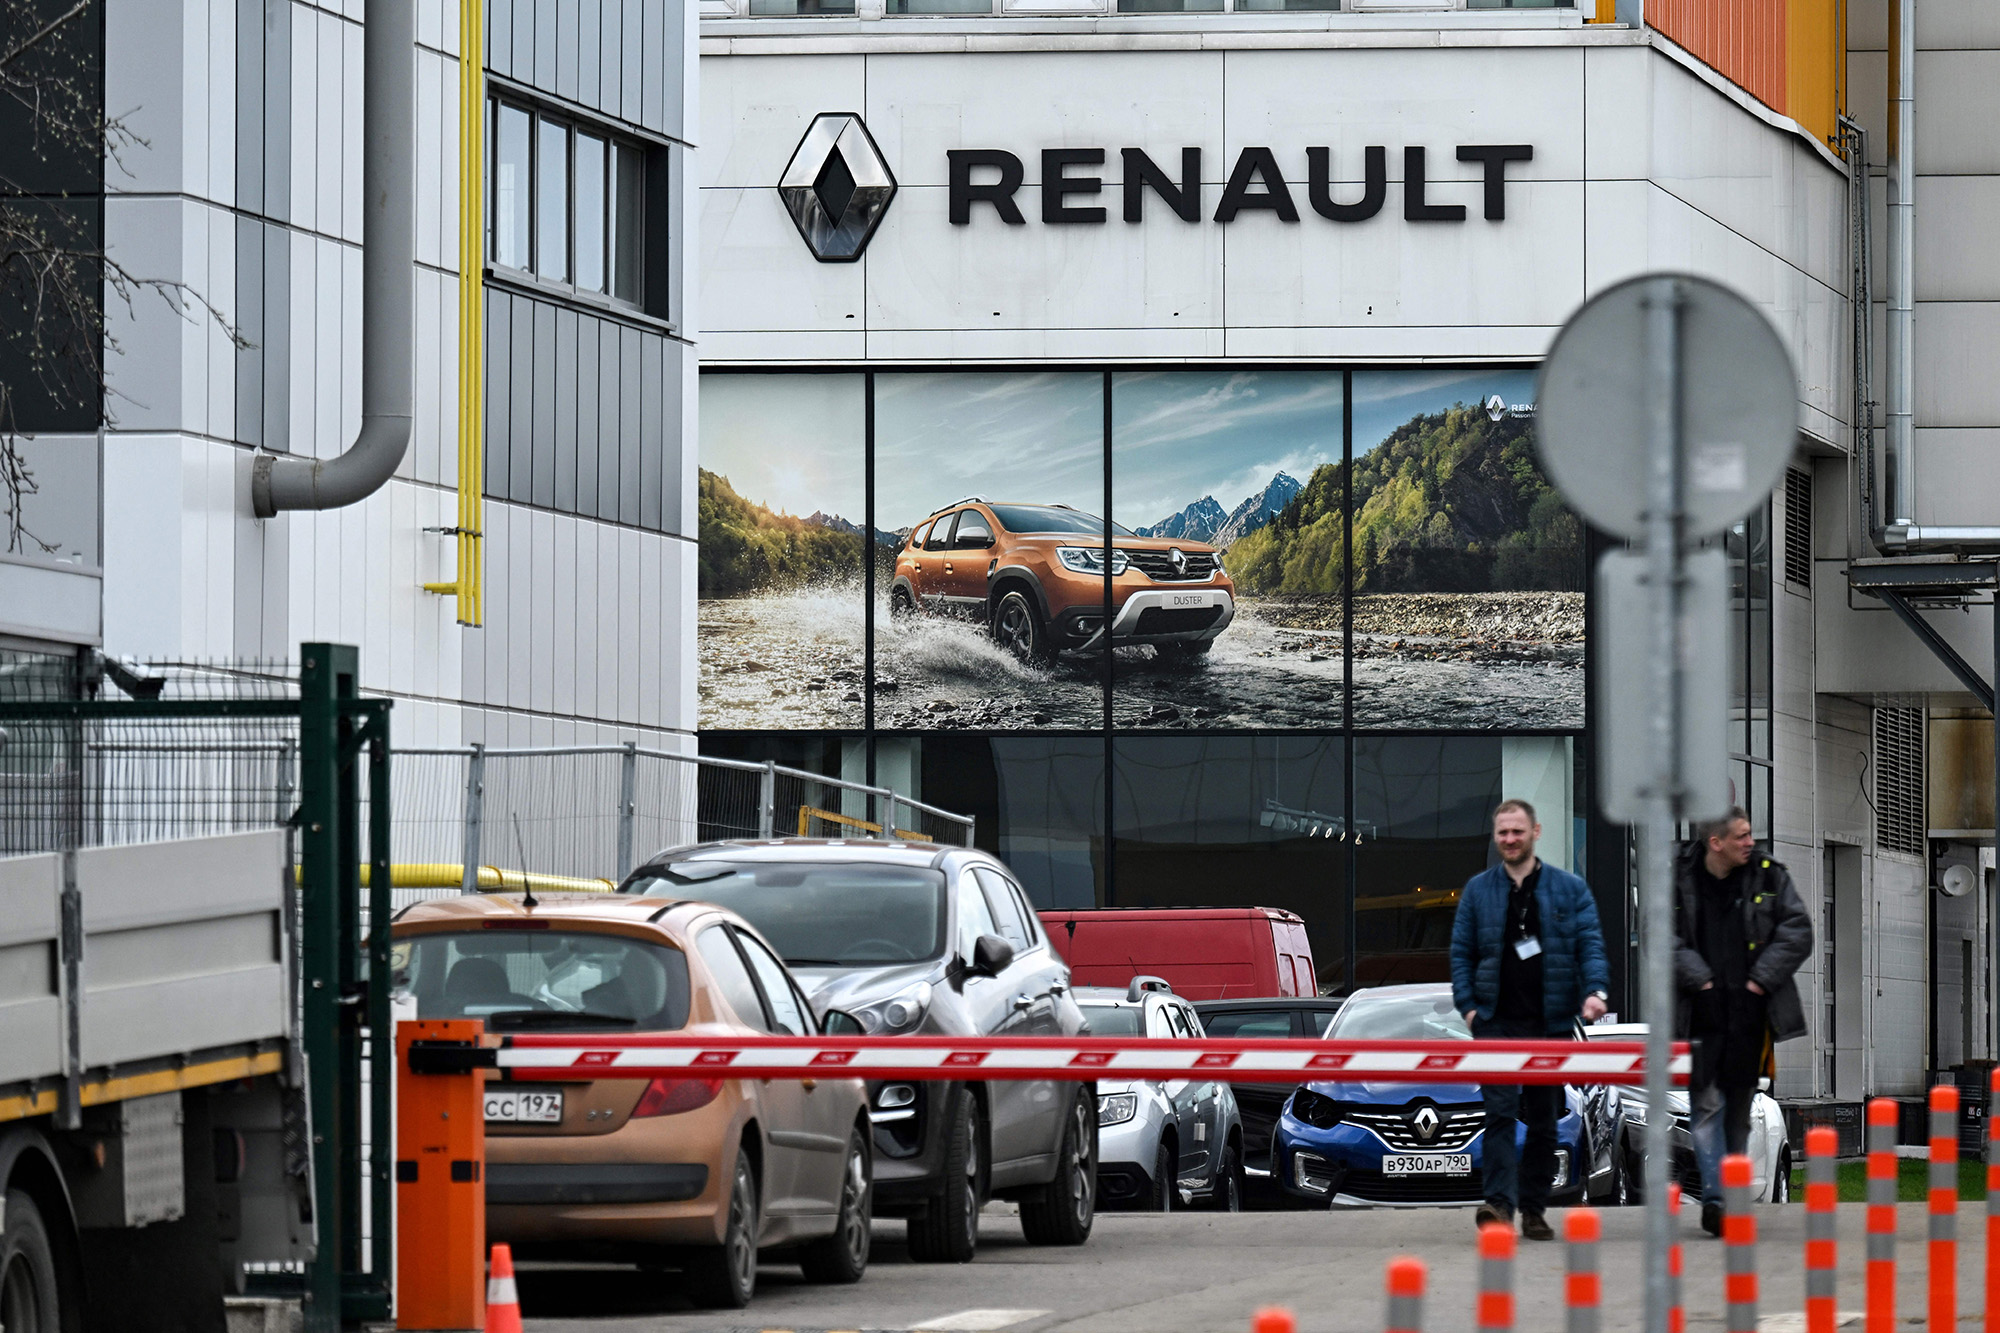 The Renault automobile plant in Moscow, Russia, on April 26.